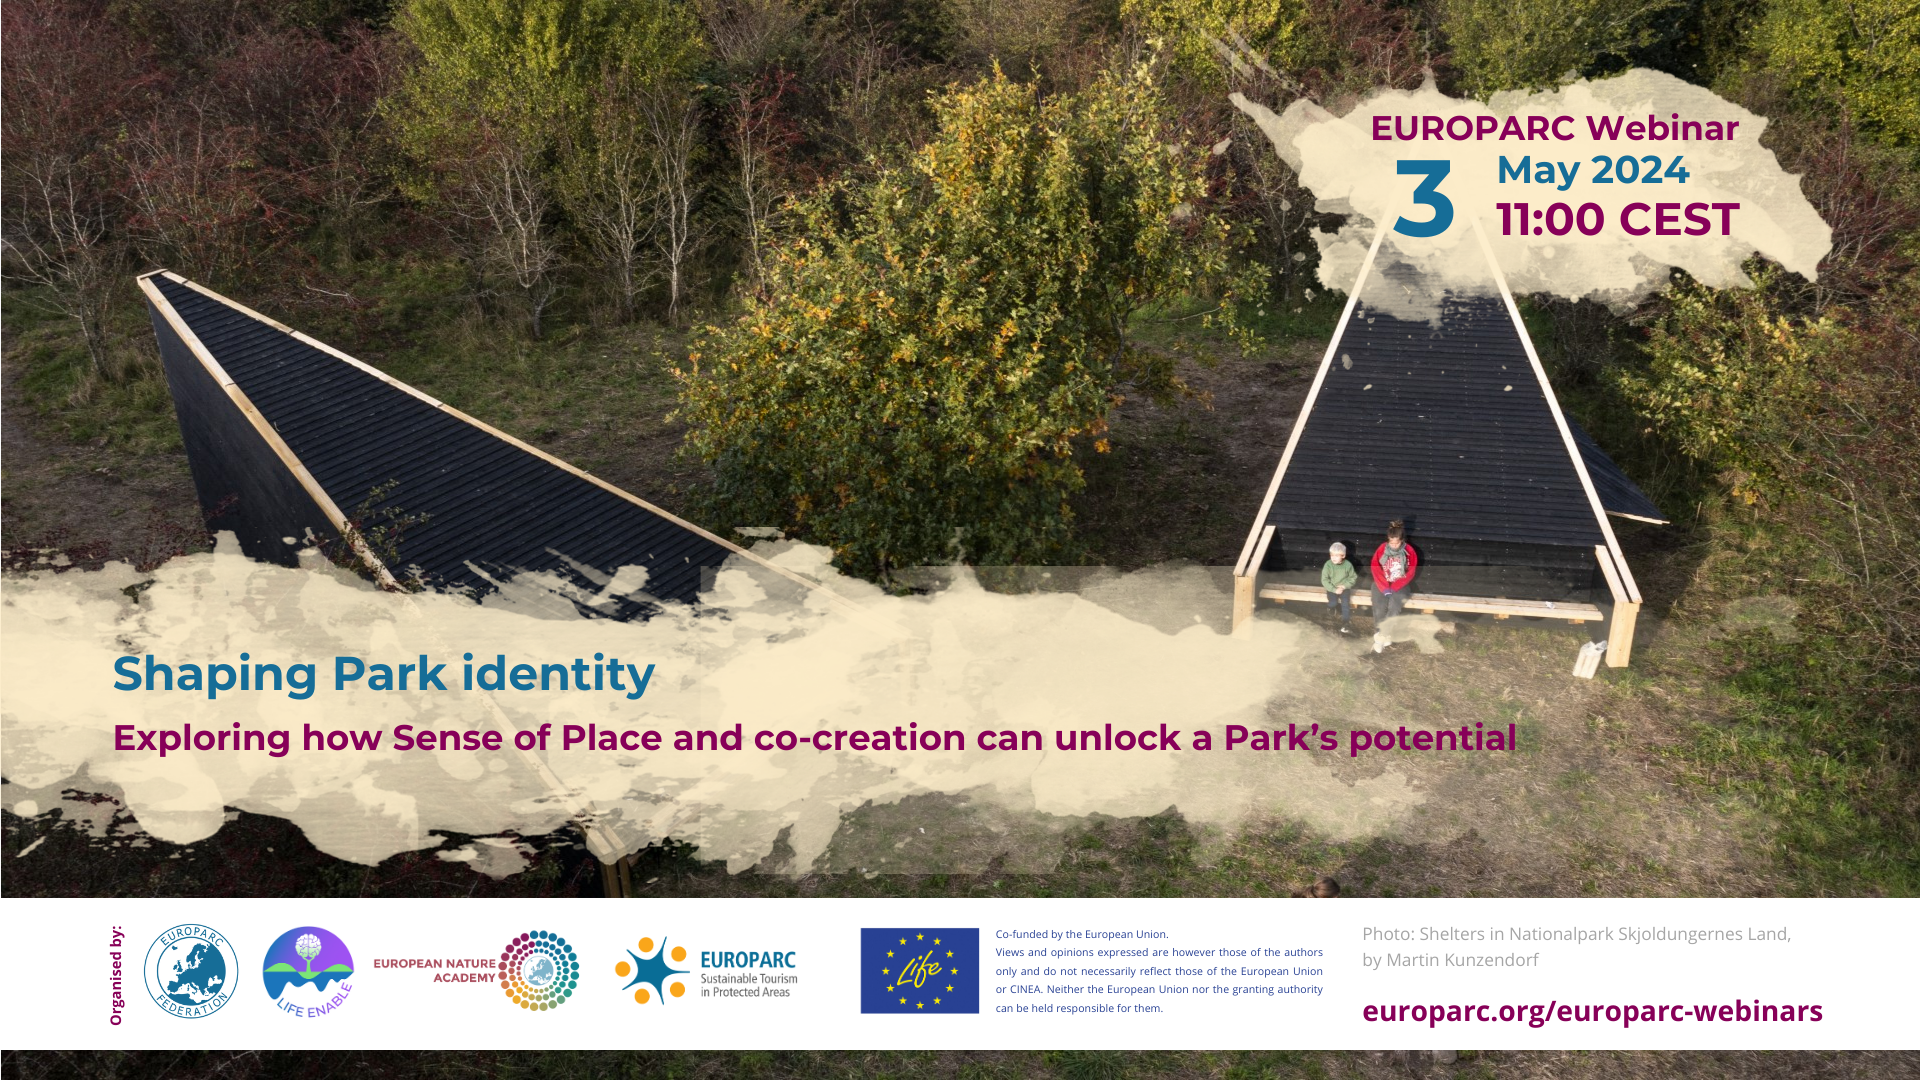 EUROPARC Webinar - Shaping Park identity: Exploring how Sense of Place and co-creation can unlock a Park’s potential